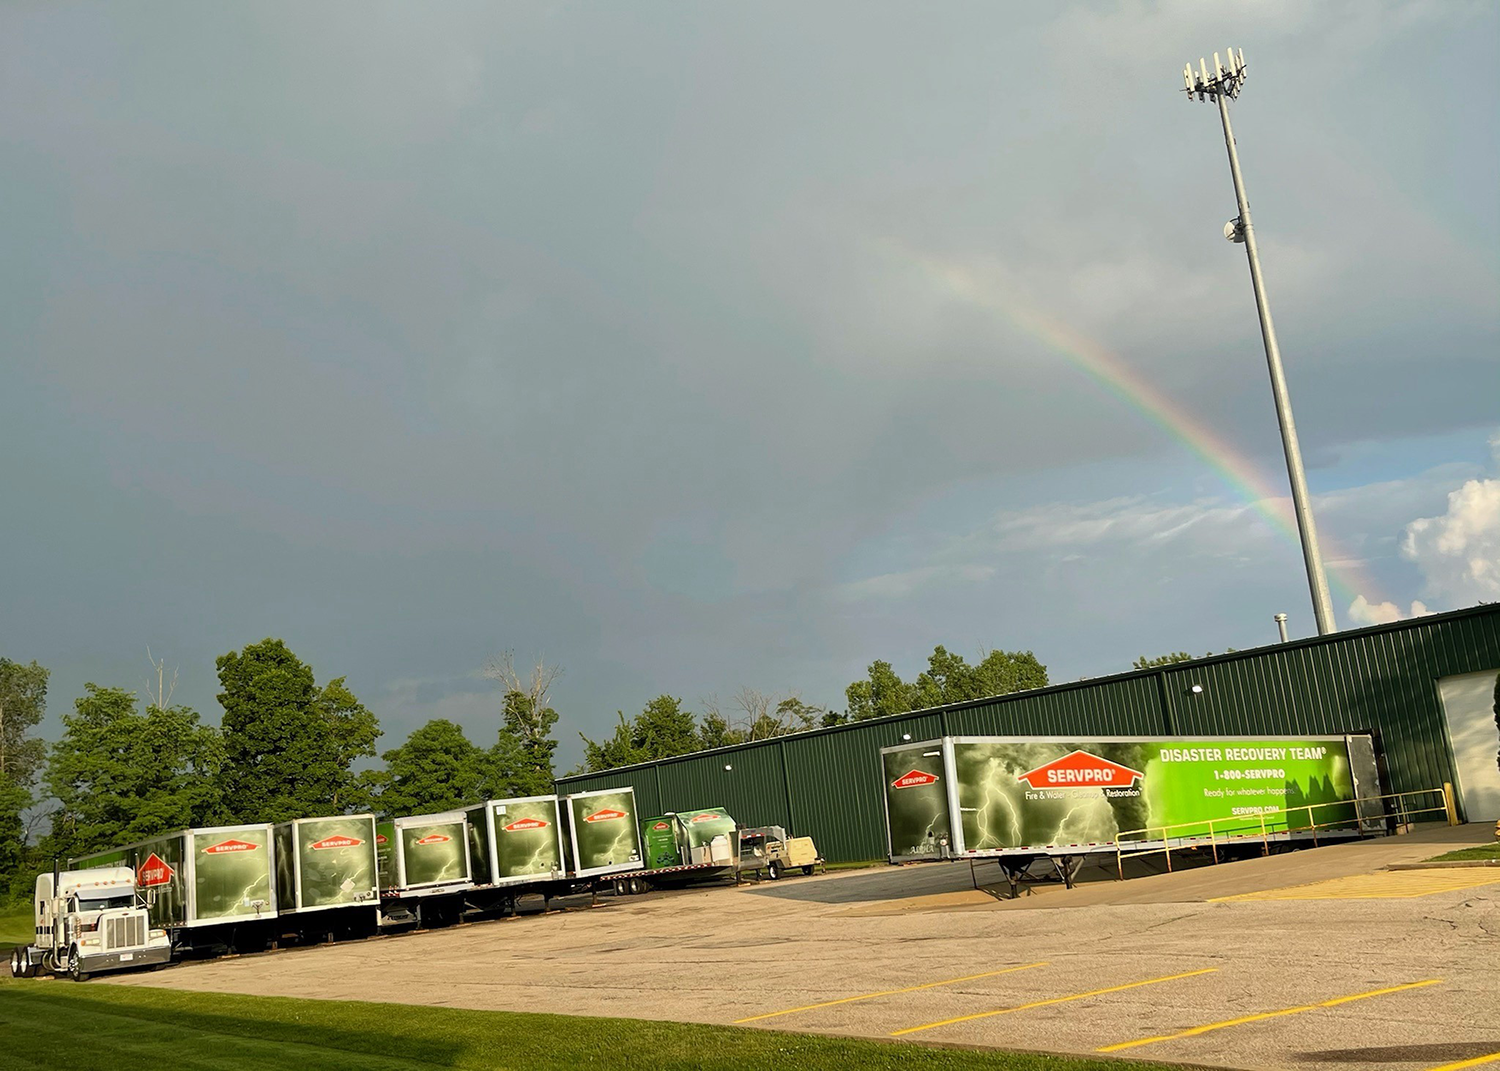 The gold at the end of the rainbow is the service we provide at SERVPRO.